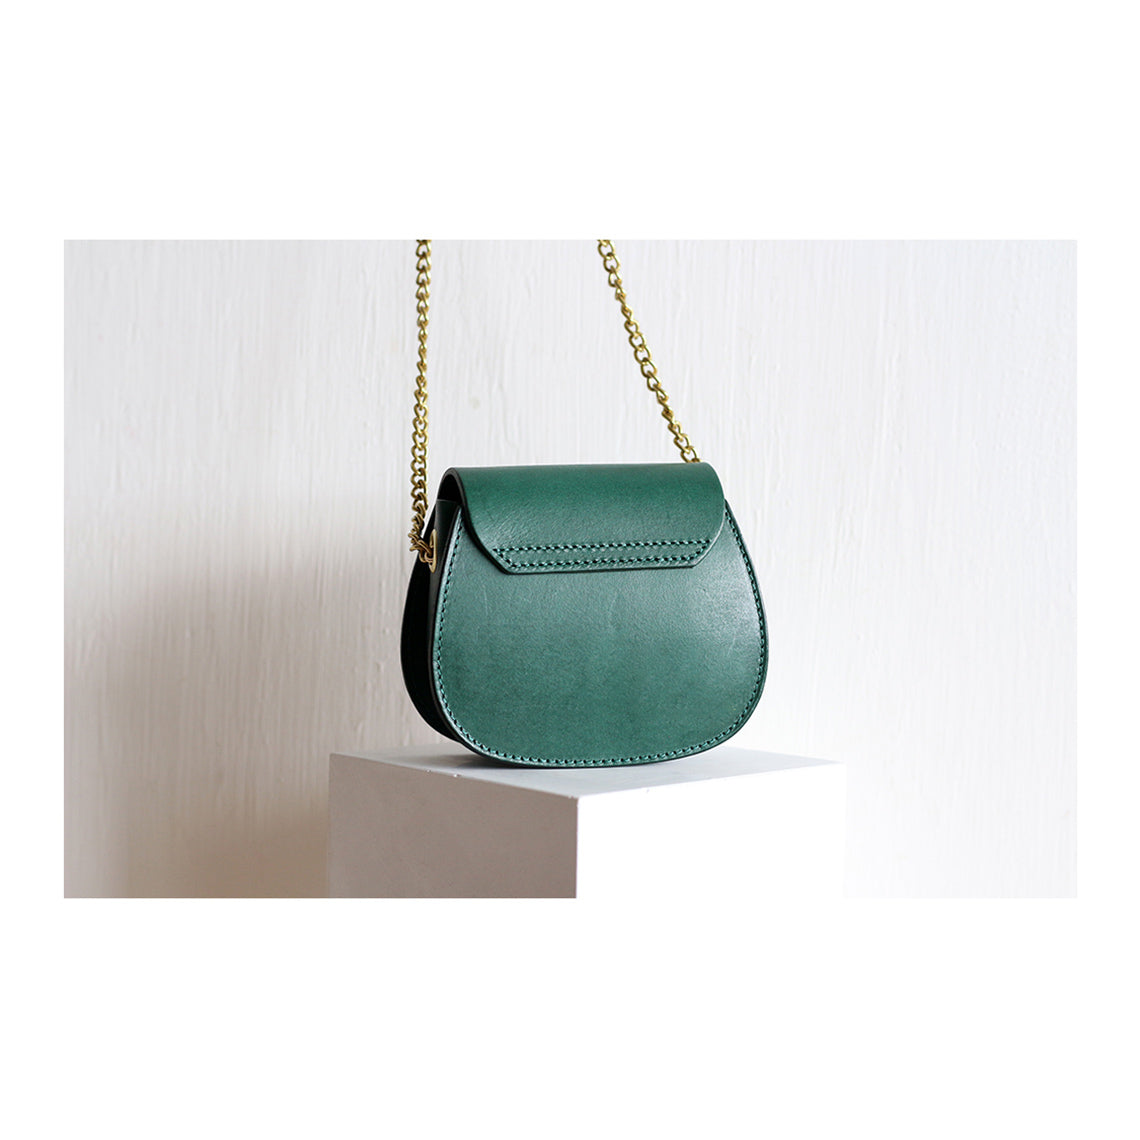 Classic Saddle Bag with Chain Strap